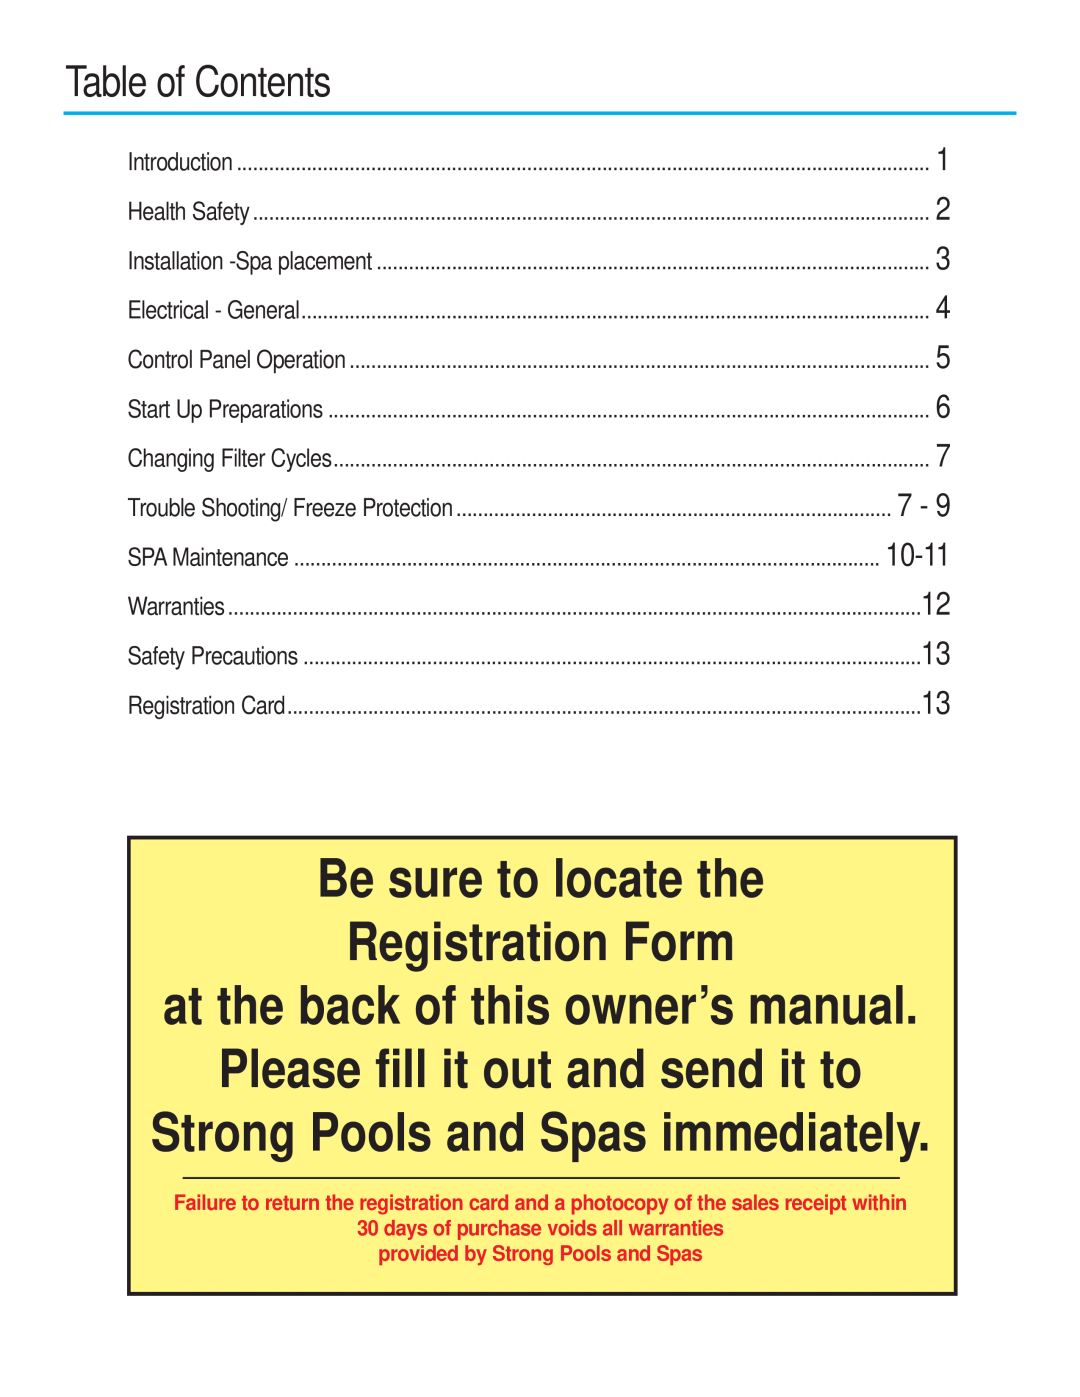 Strong Pools and Spas Grand Cayman Spa owner manual Table of Contents, Be sure to locate the Registration Form 